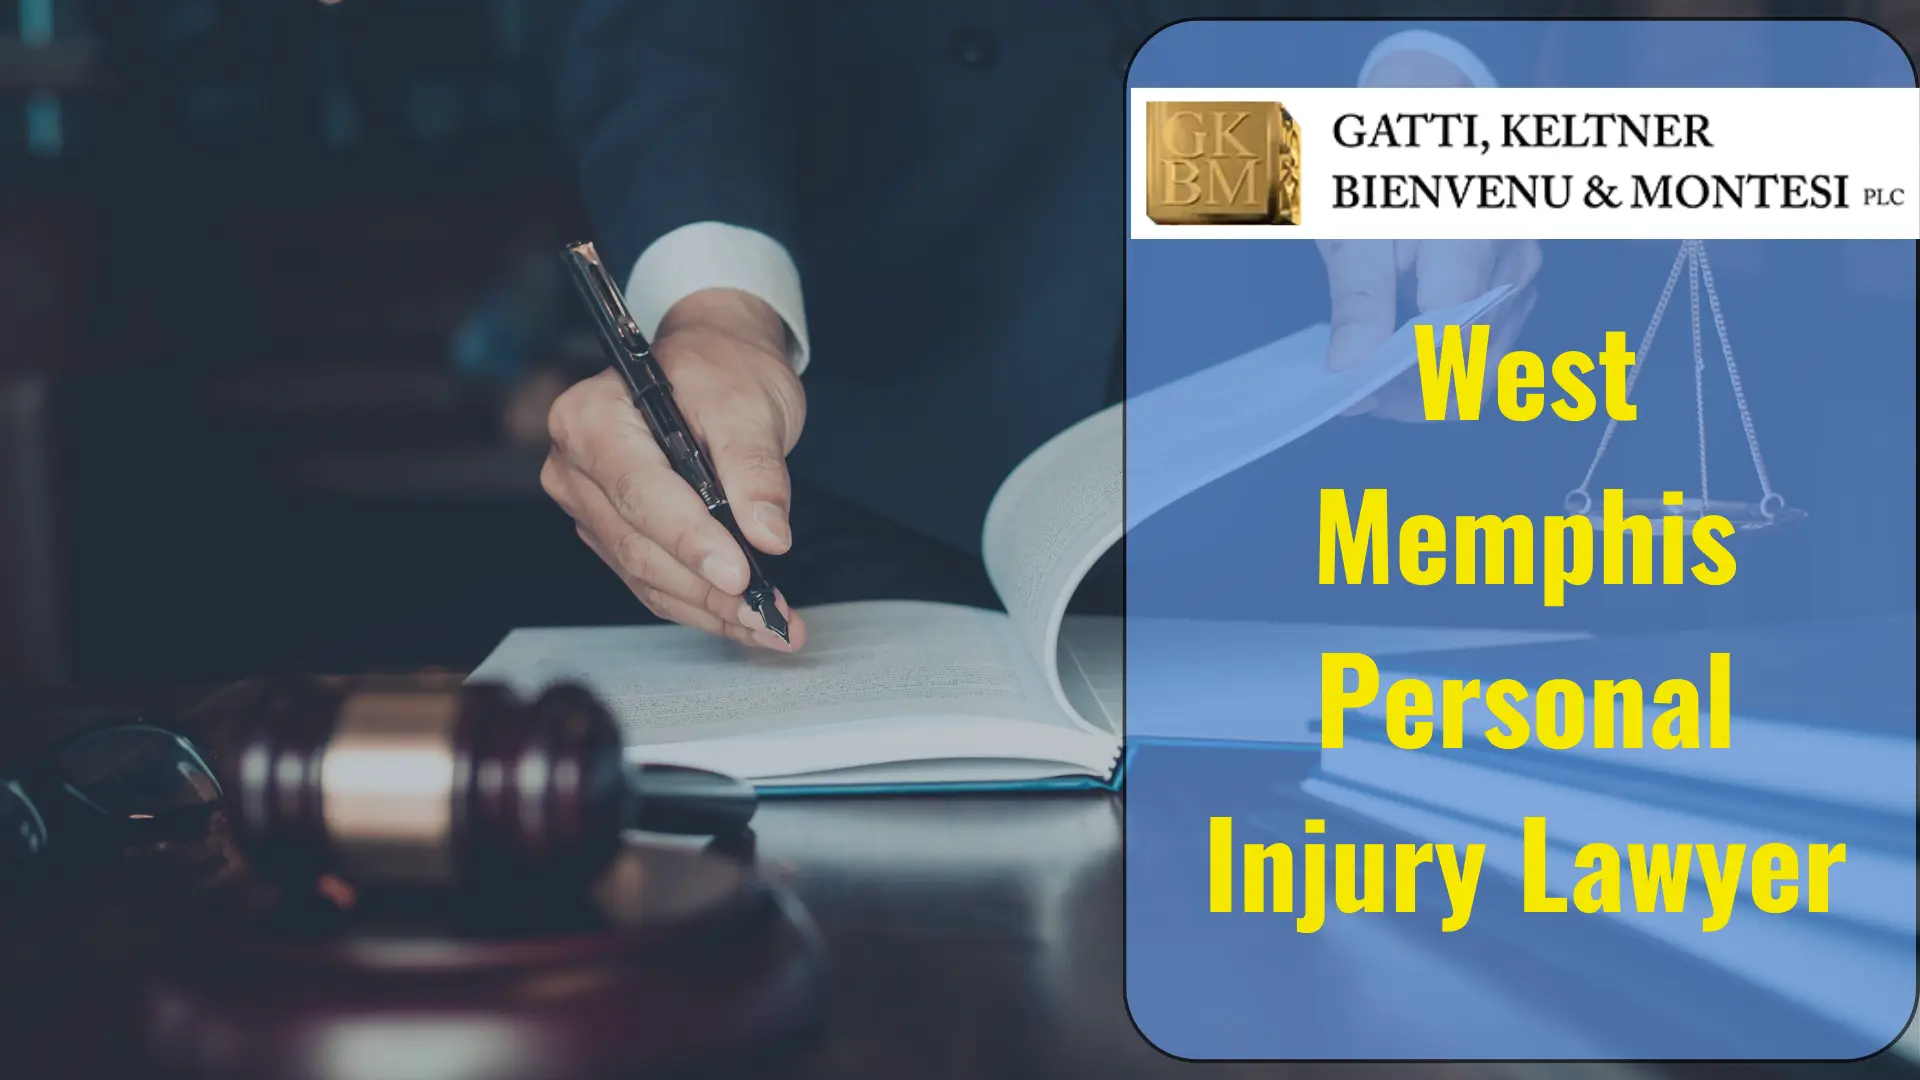 West Memphis Personal Injury Lawyer